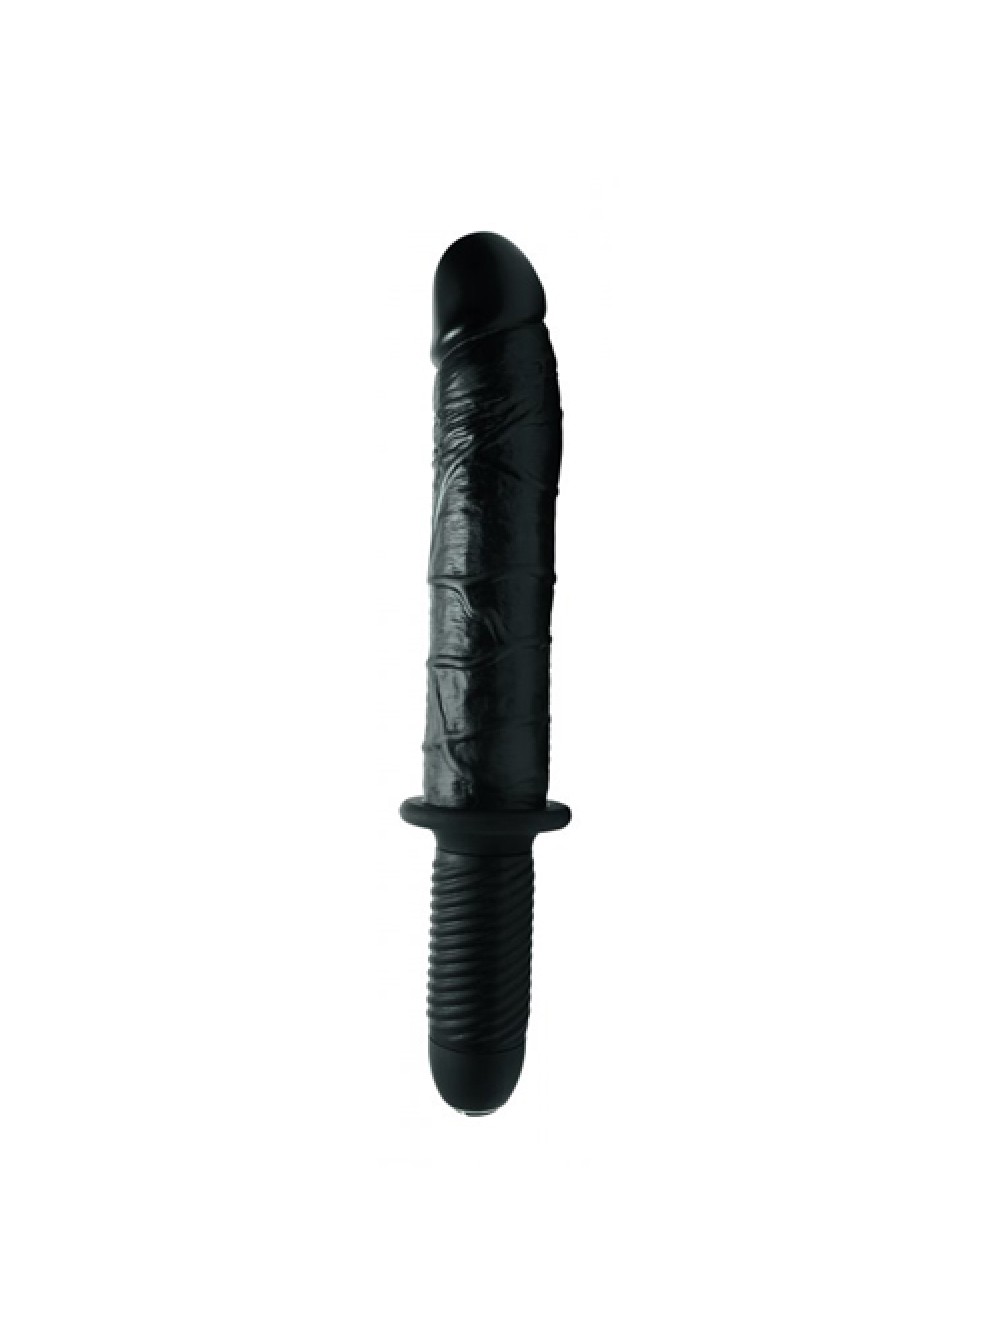 Enormass Vibrator With Handle 848518023322